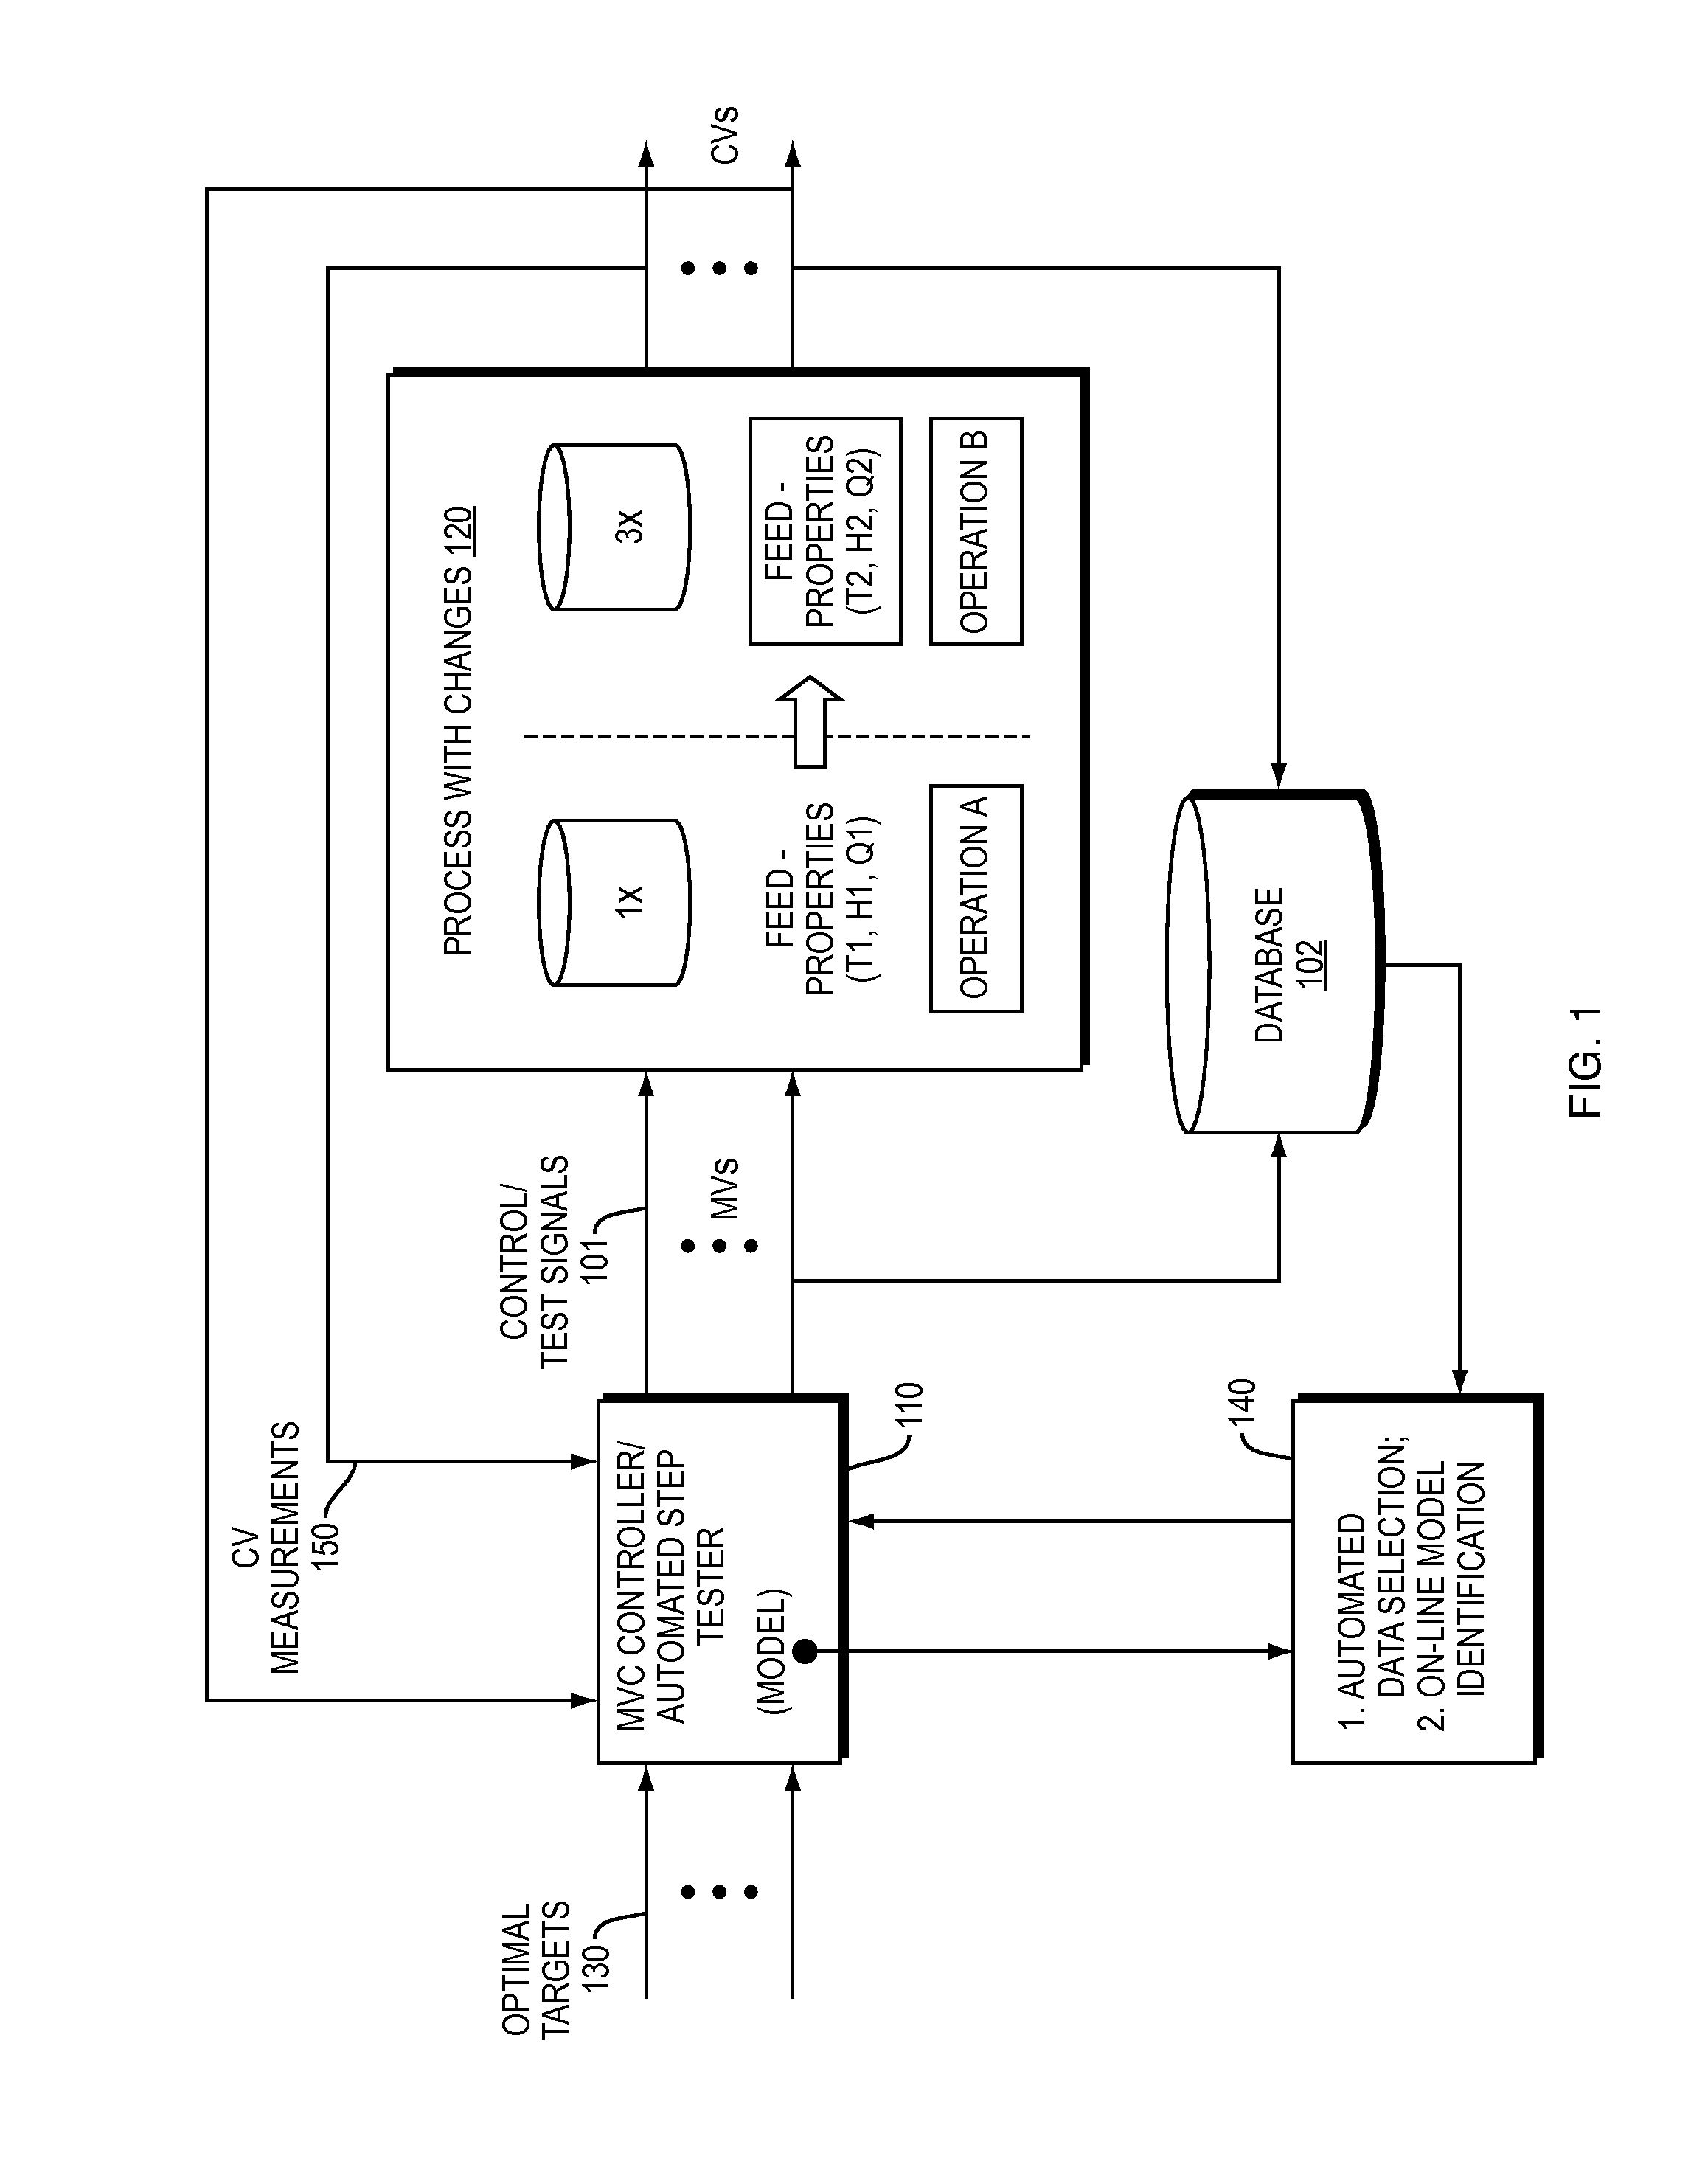 Apparatus and Method for Automated Data Selection in Model Identification and Adaptation in Multivariable Process Control